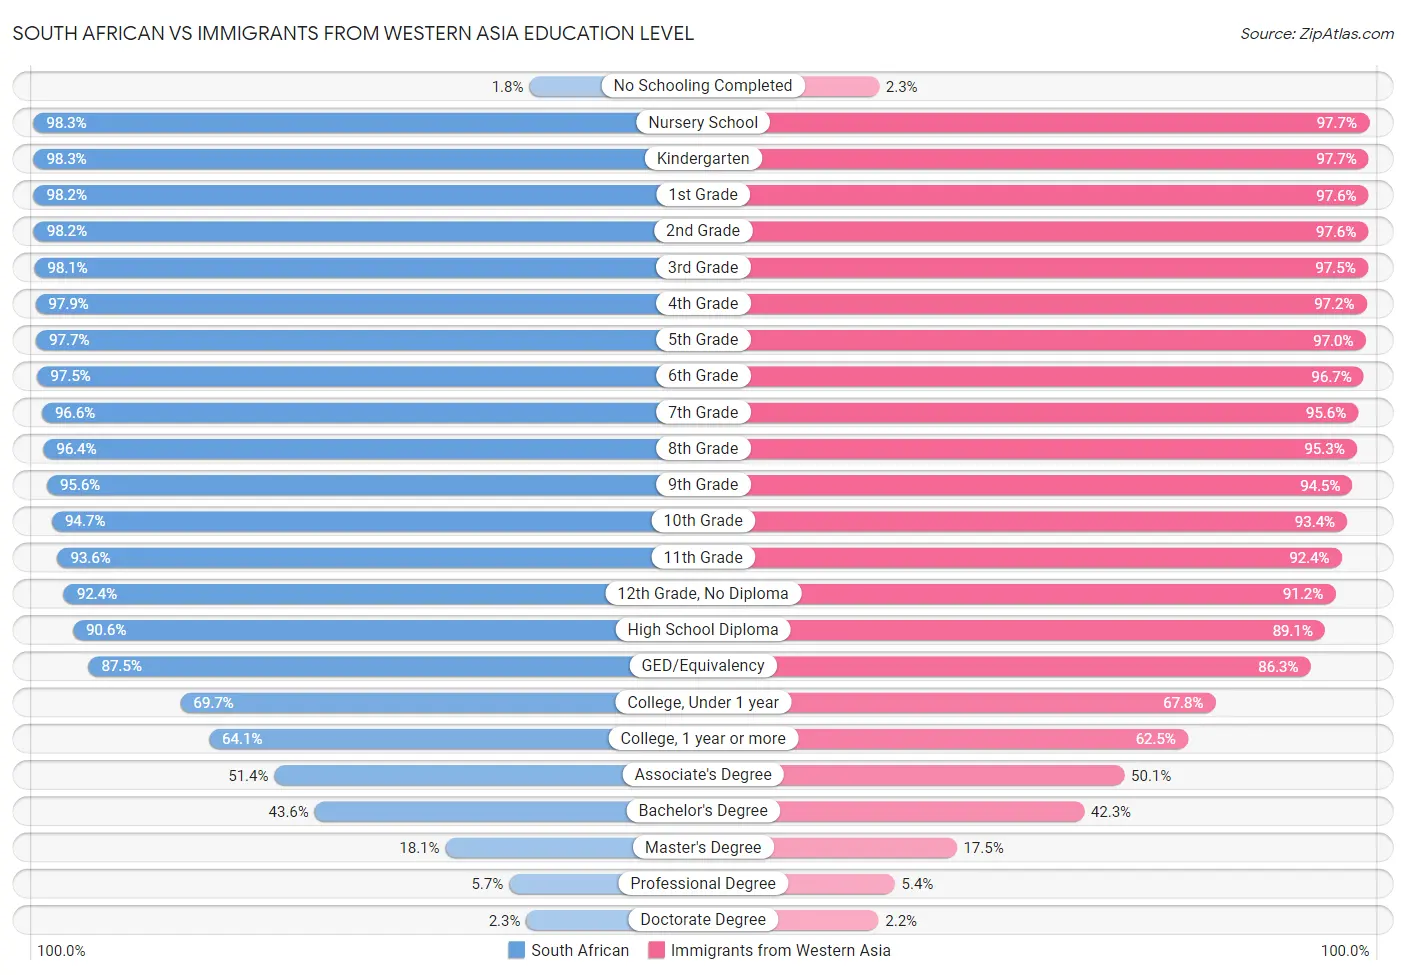 South African vs Immigrants from Western Asia Education Level